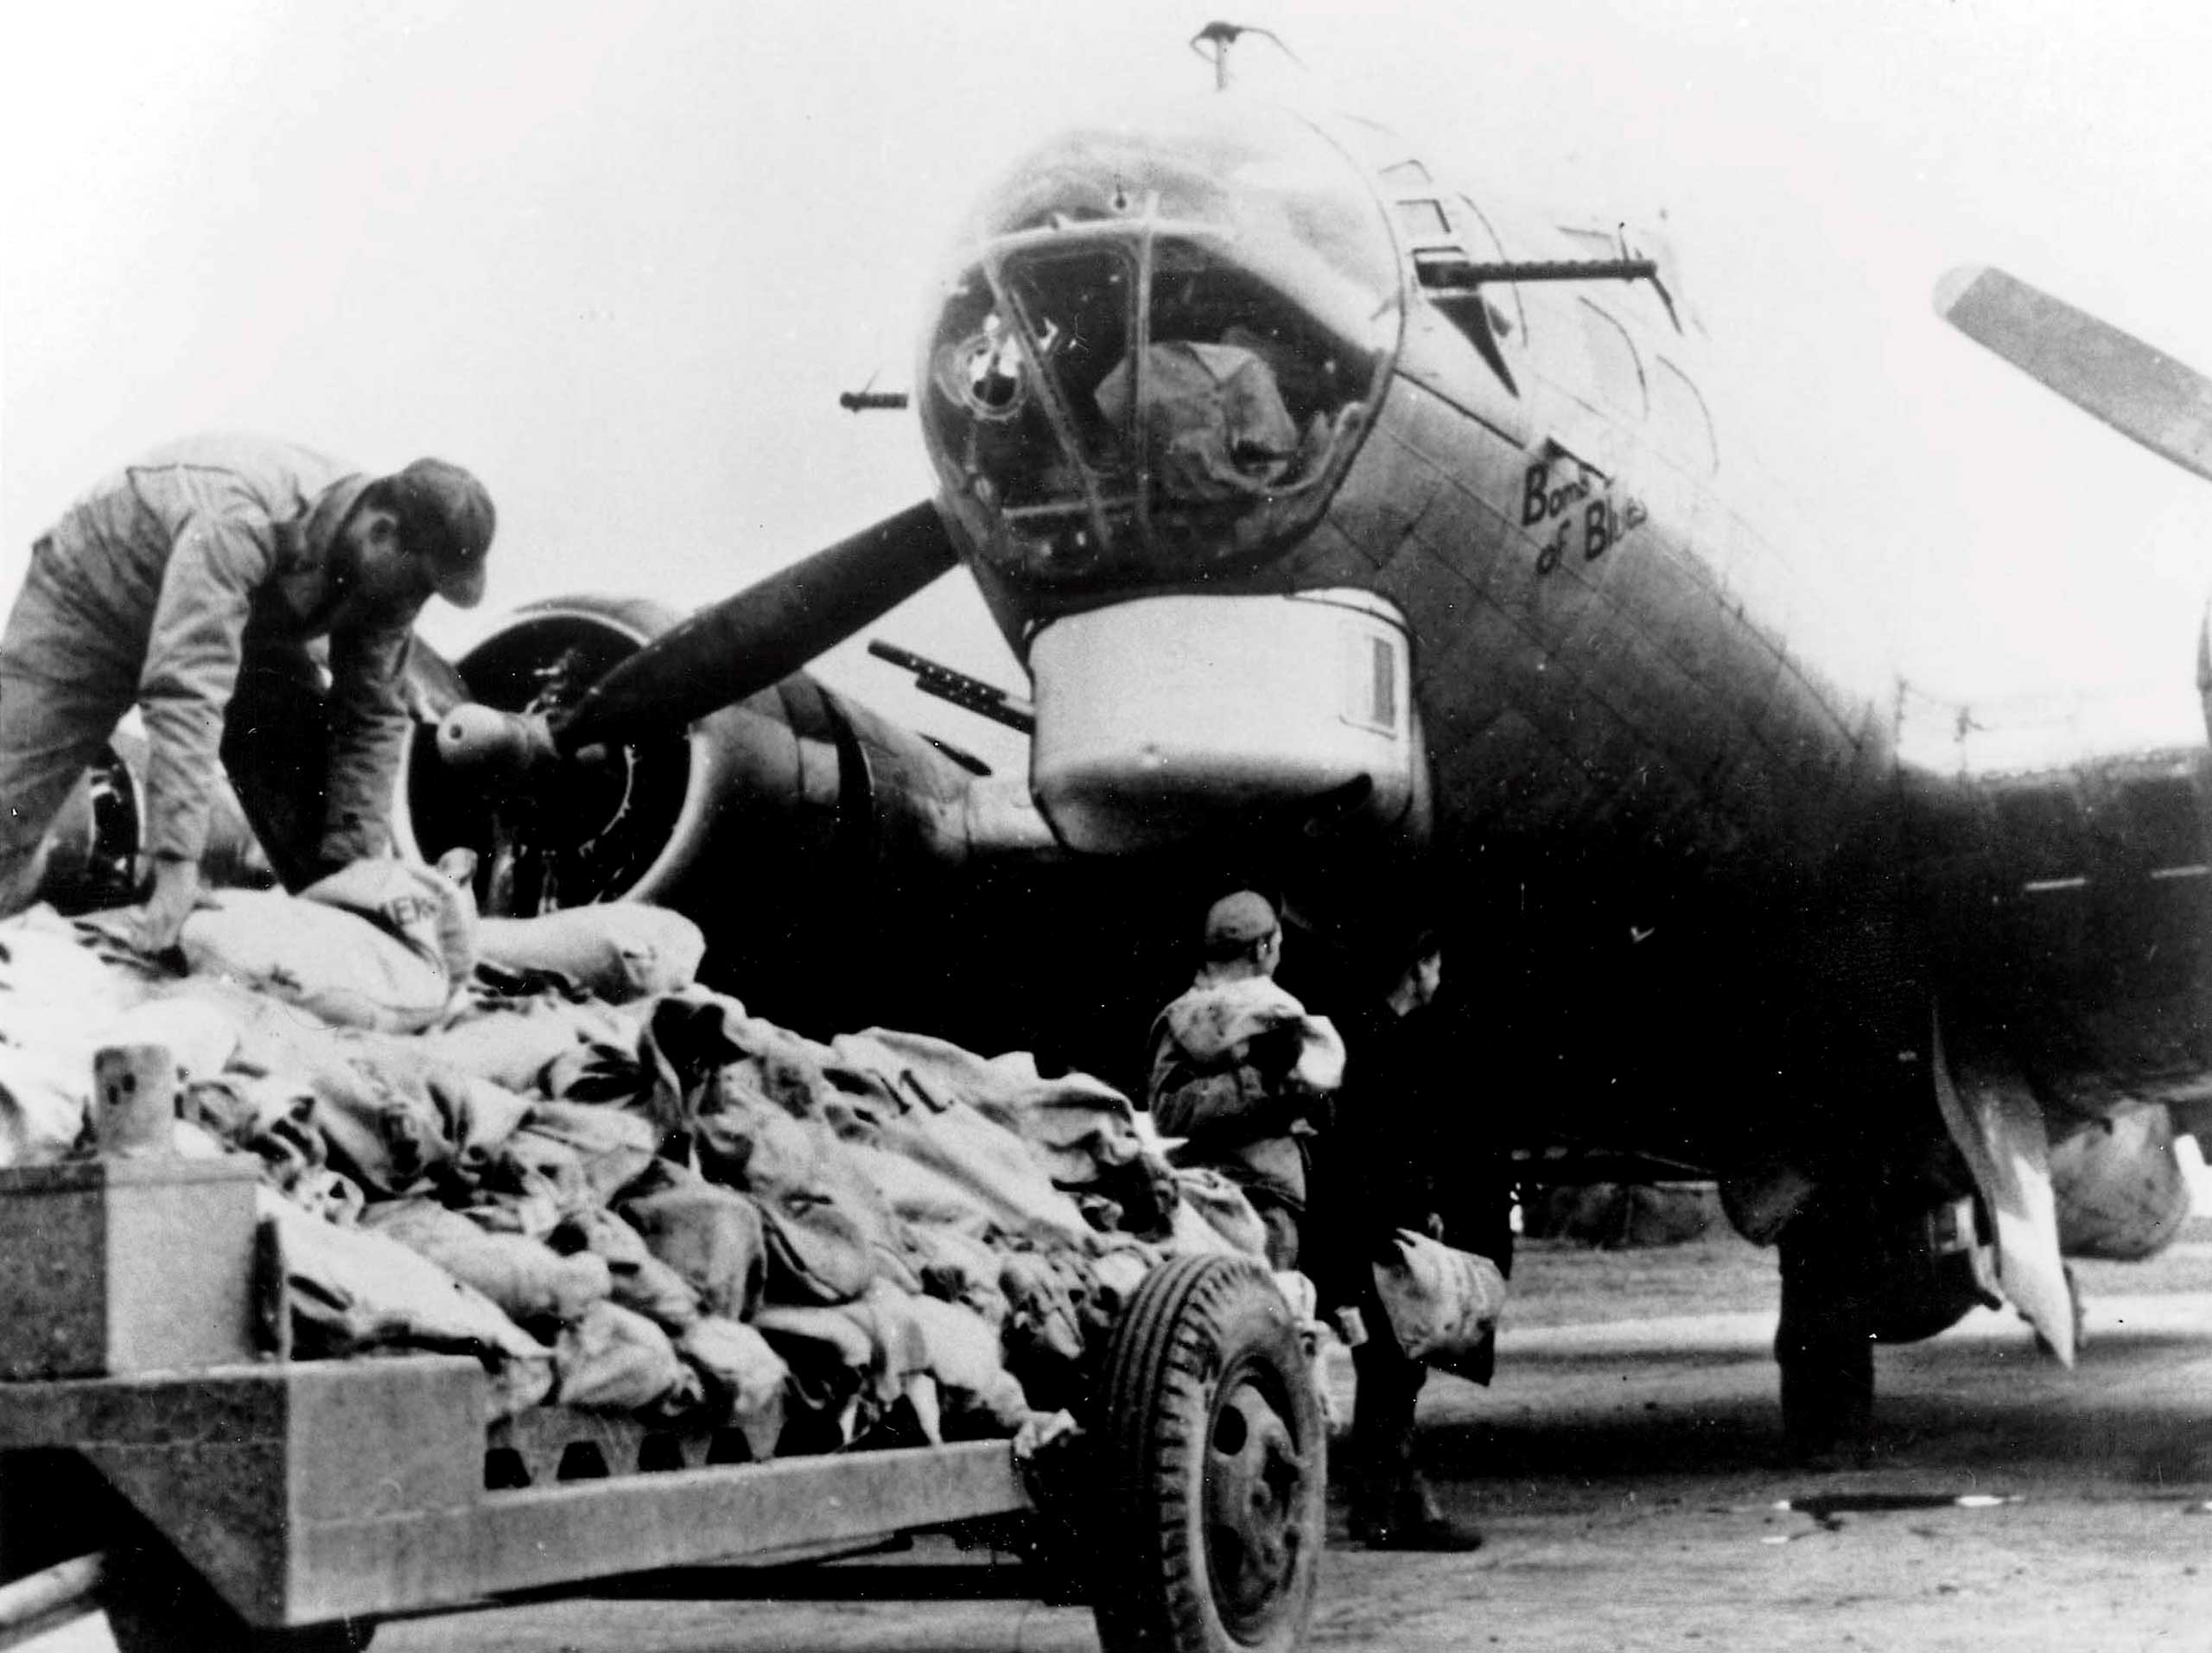 Workers load food onto an American B17 bomber during Operation Chowhound which involved dropping essential food supplies from bombers to the starving Dutch people at the end of WWII.